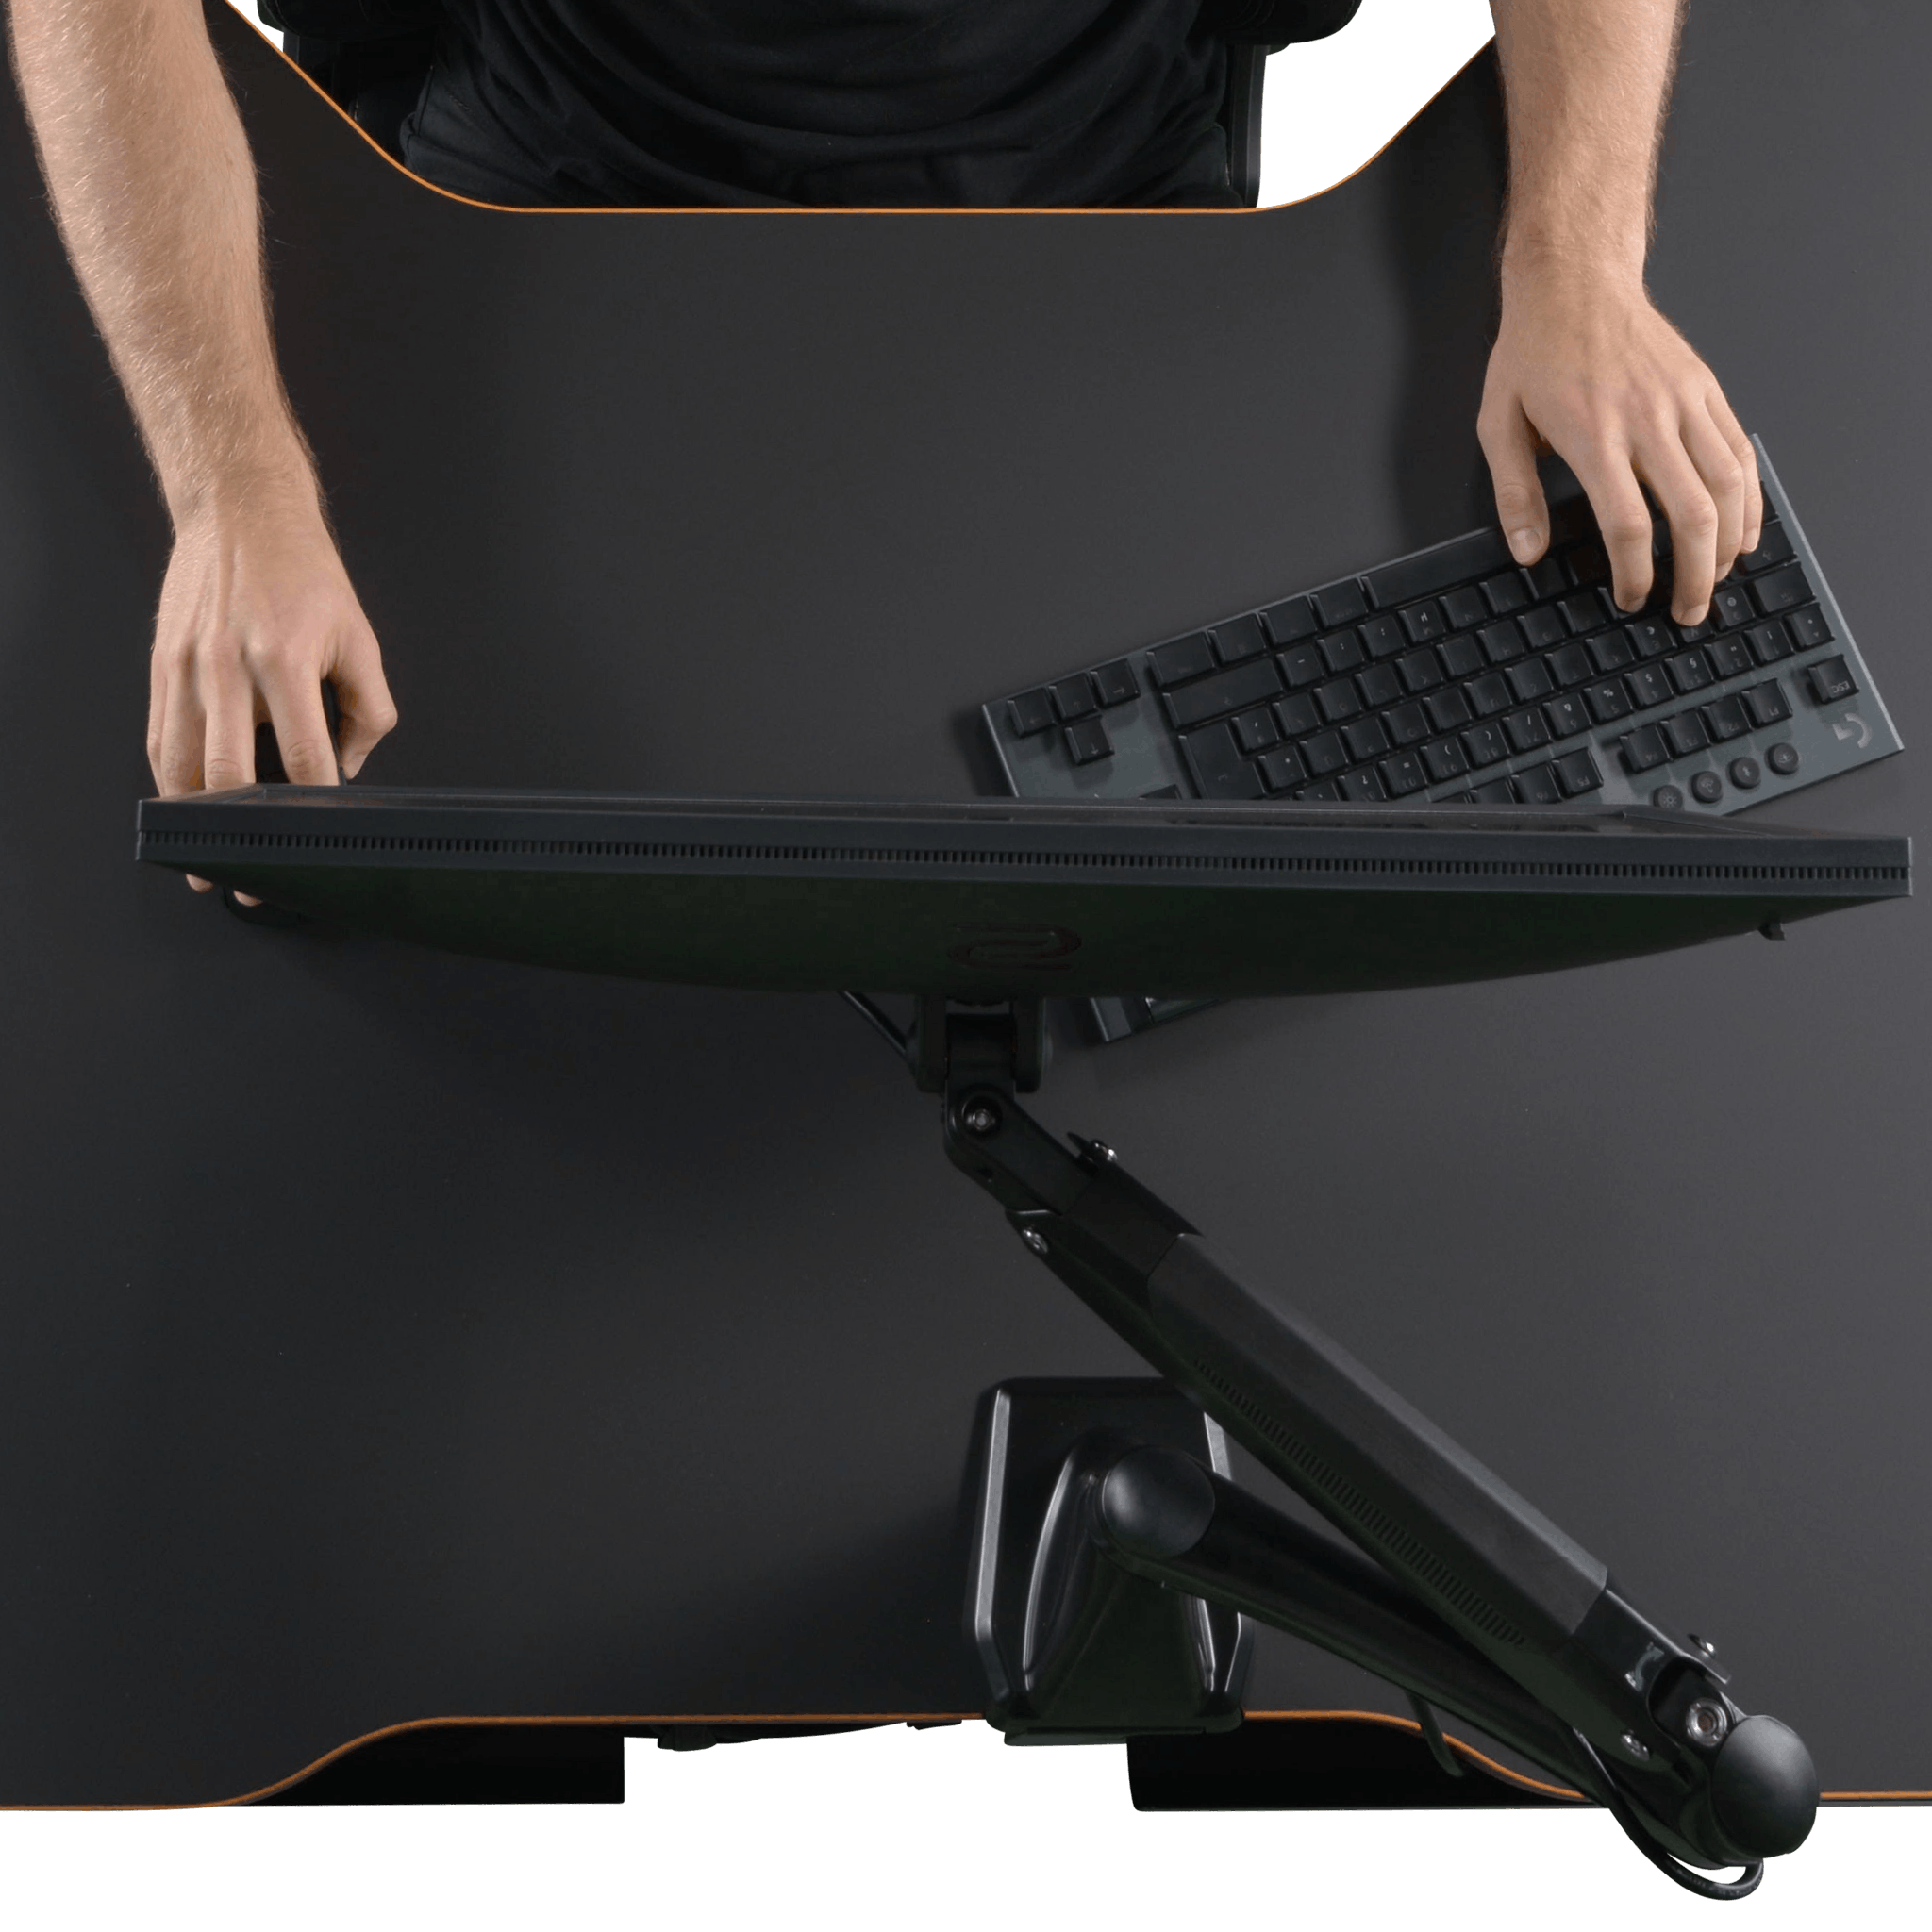 The LeetDesk Monitor Arm allows full control over screen distance and mouse and keyboard placement